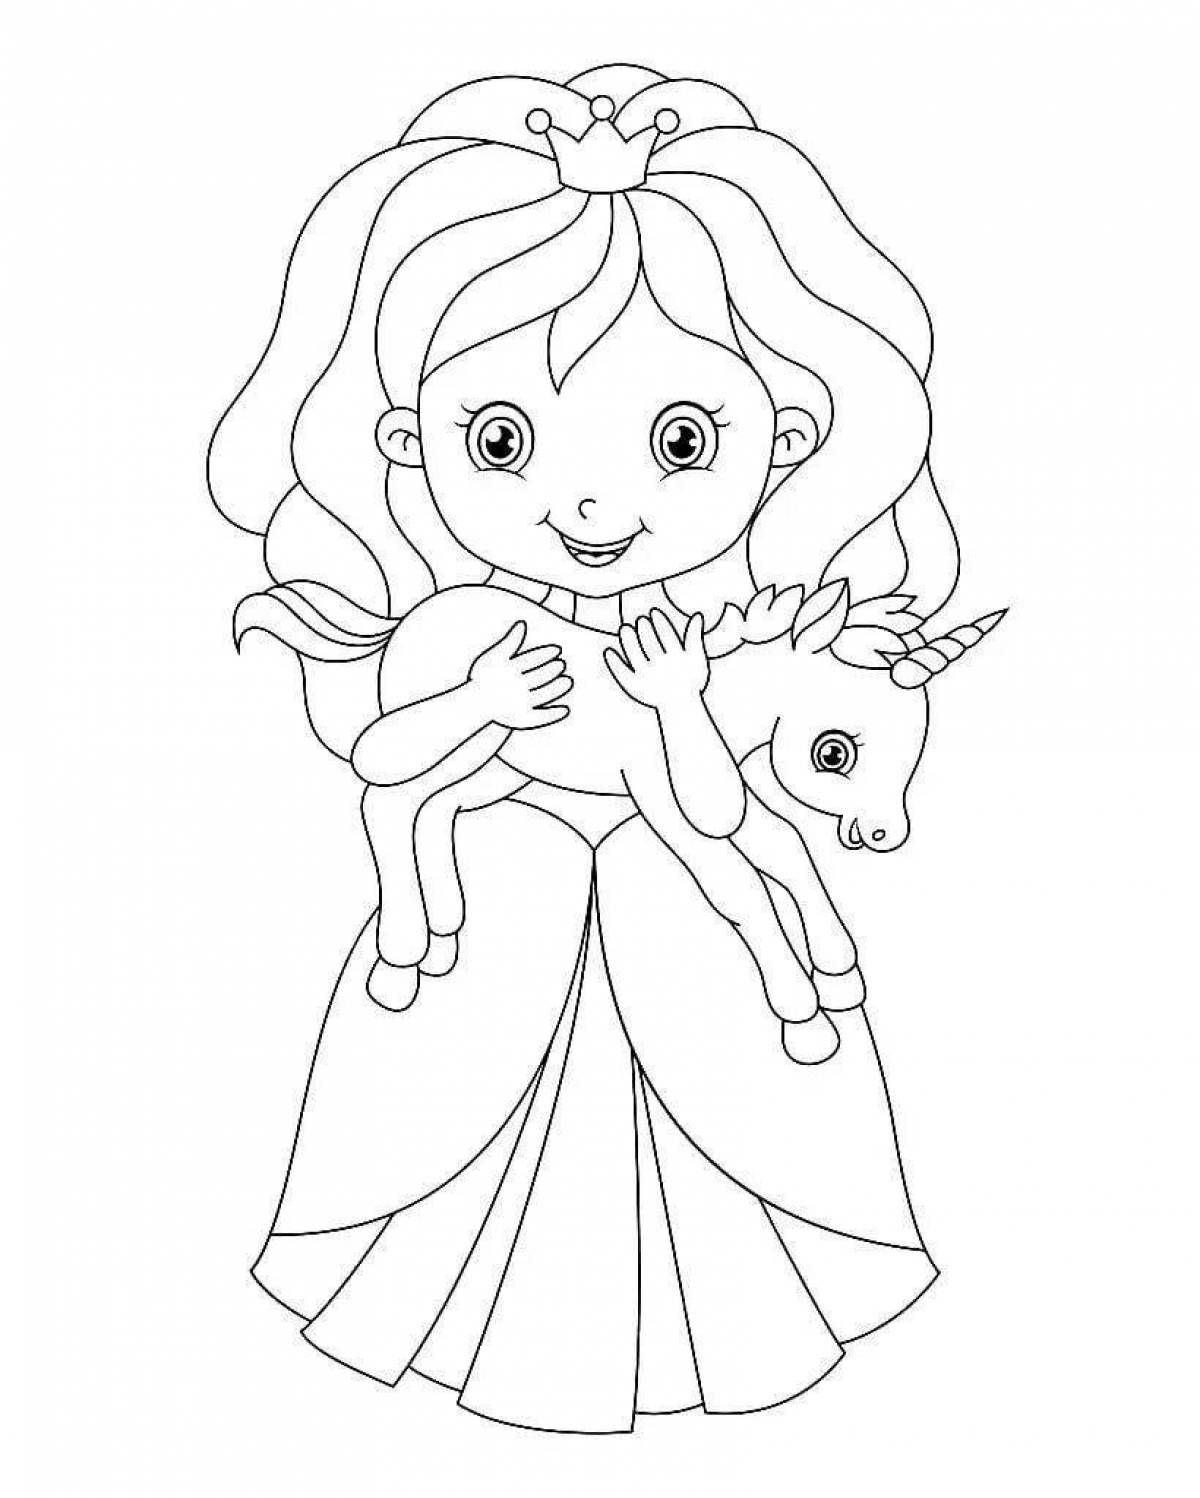 Adorable princess coloring book for girls 4 years old